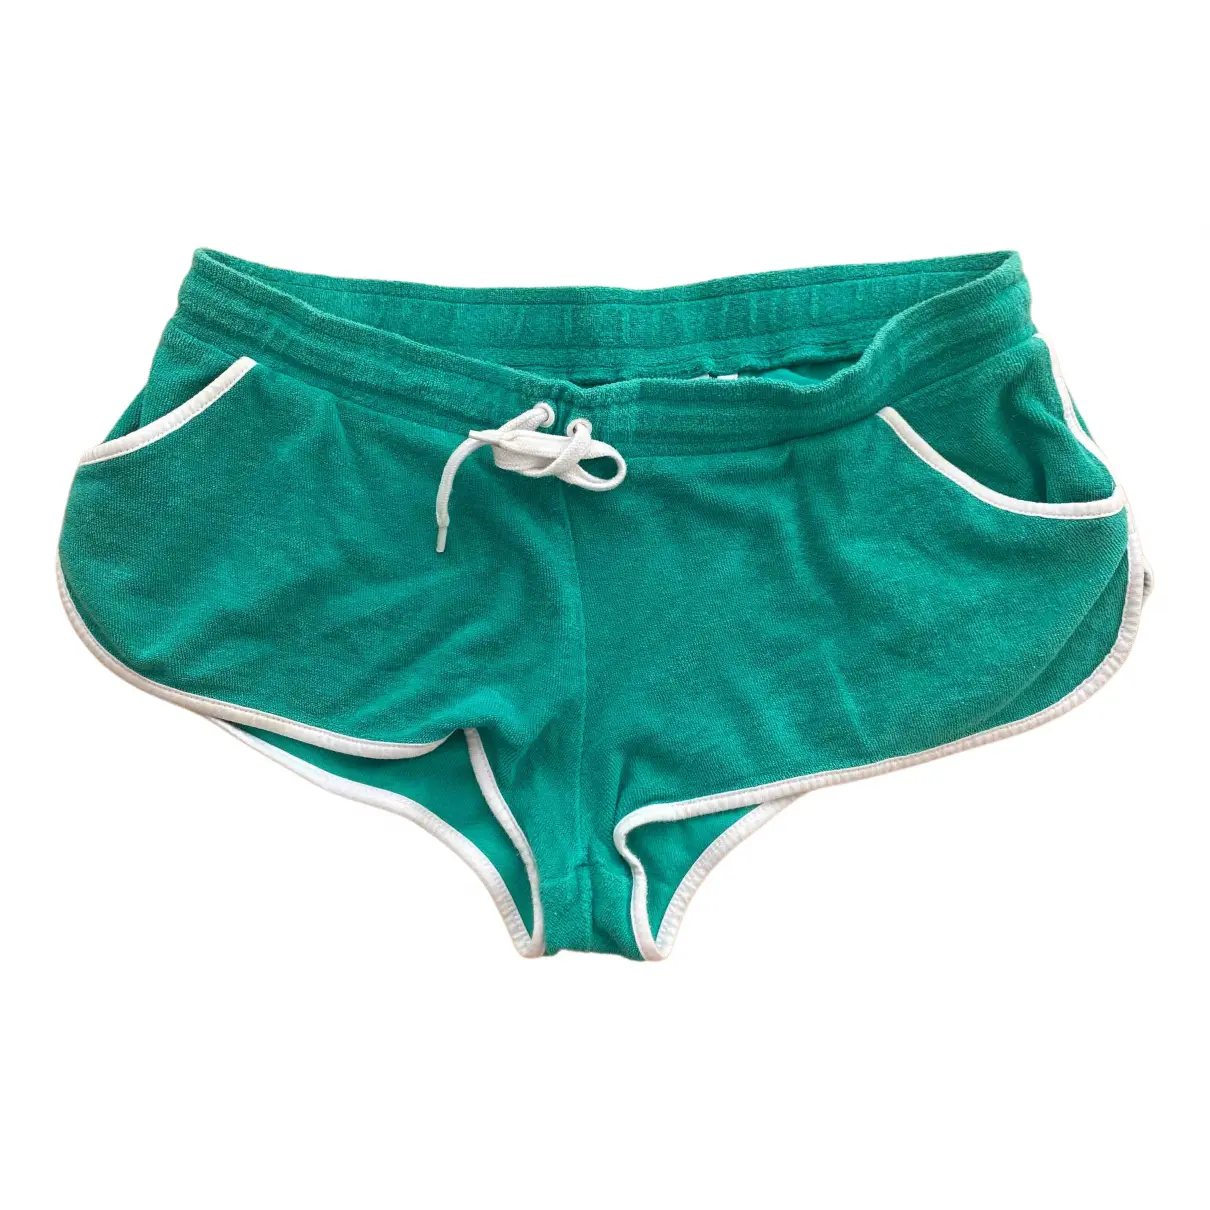 Green Cotton Shorts Lacoste